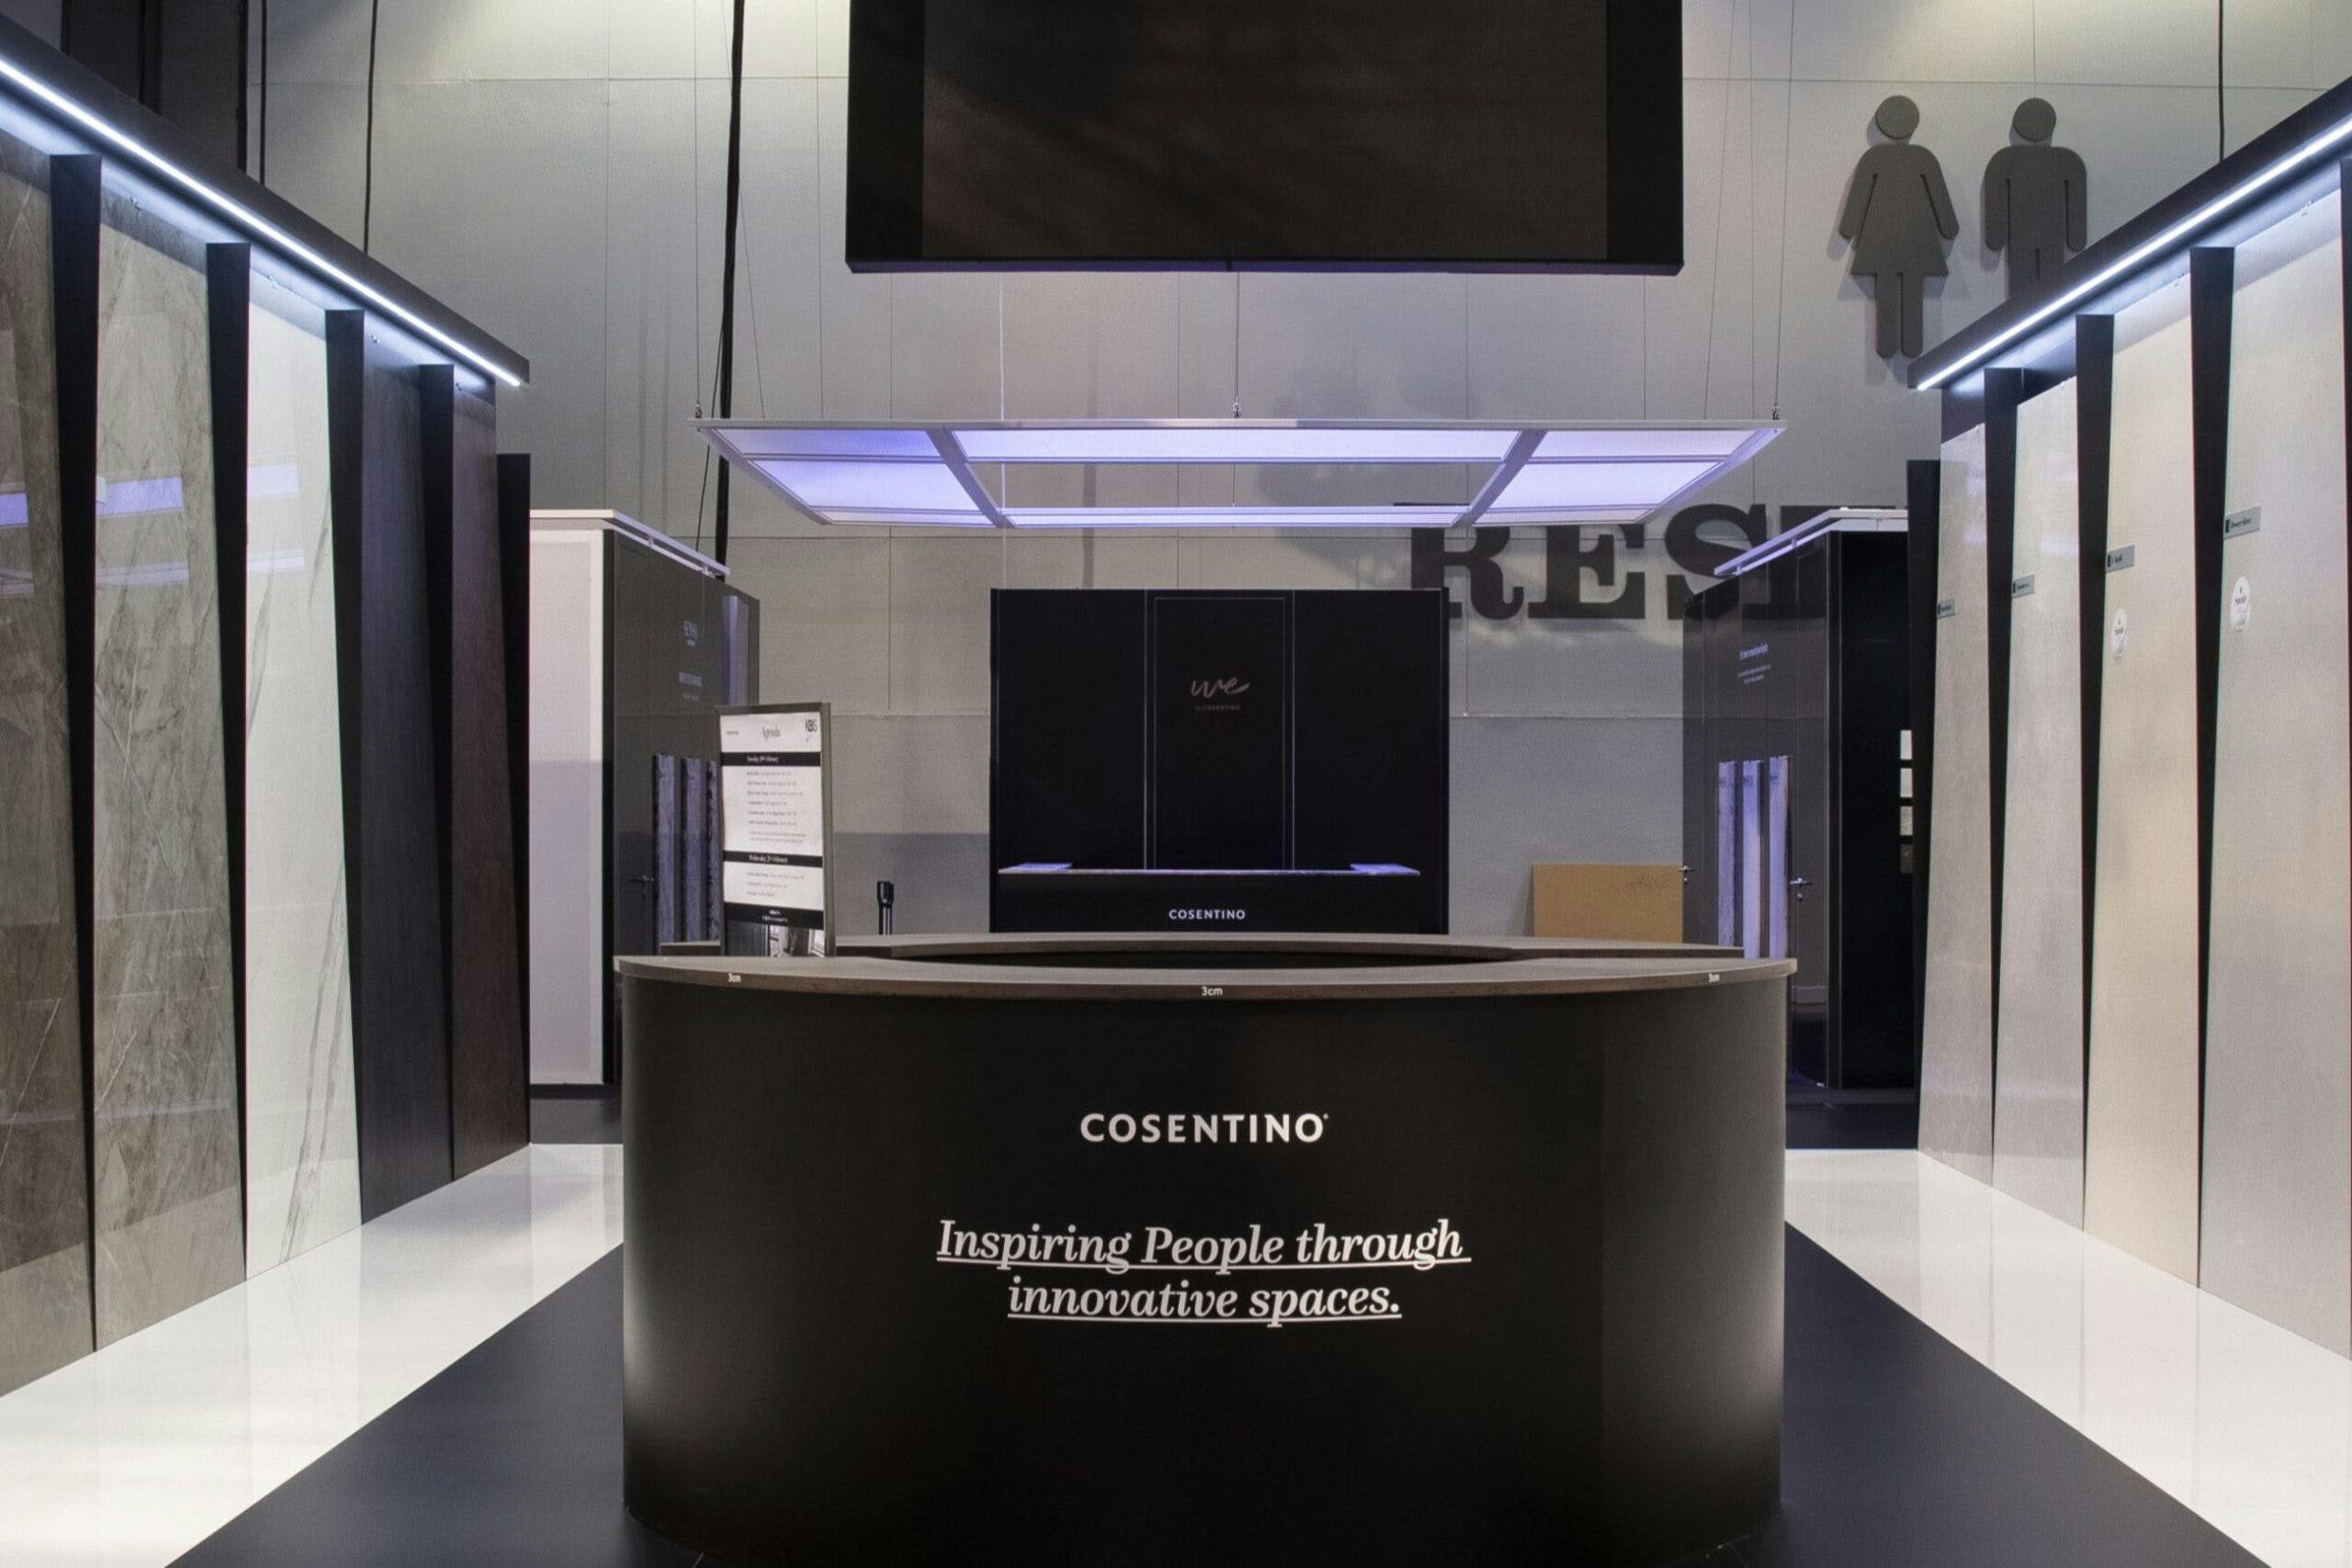 Image 31 of Stand Cosentino en KBIS 2019 baja 1 scaled in Cosentino at KBIS 2019 - Cosentino